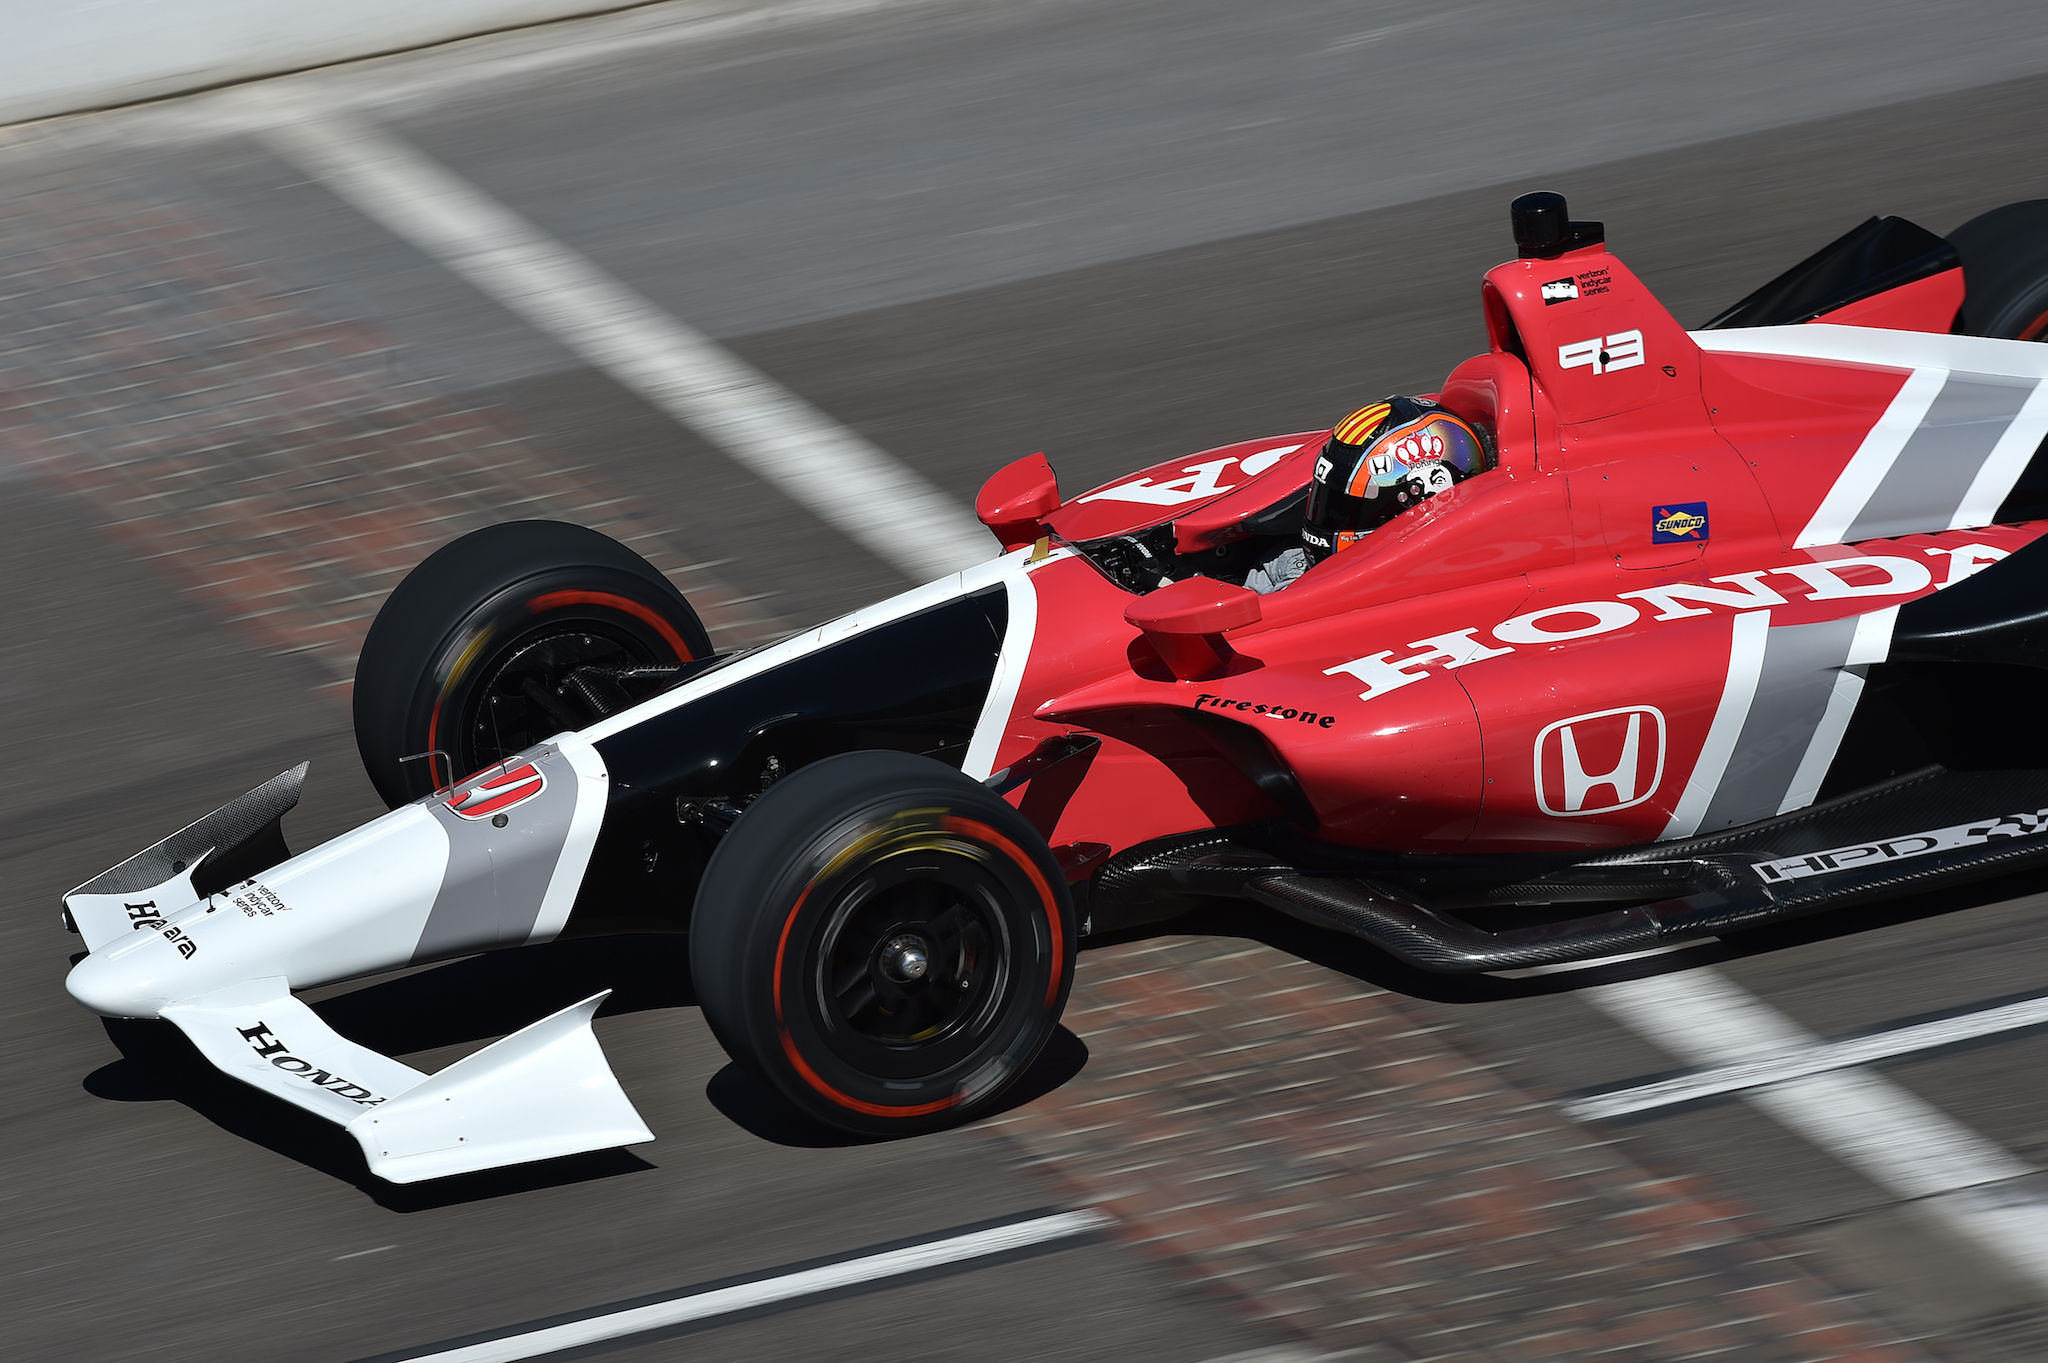 See IndyCar’s bold new look for 2018 Ars Technica